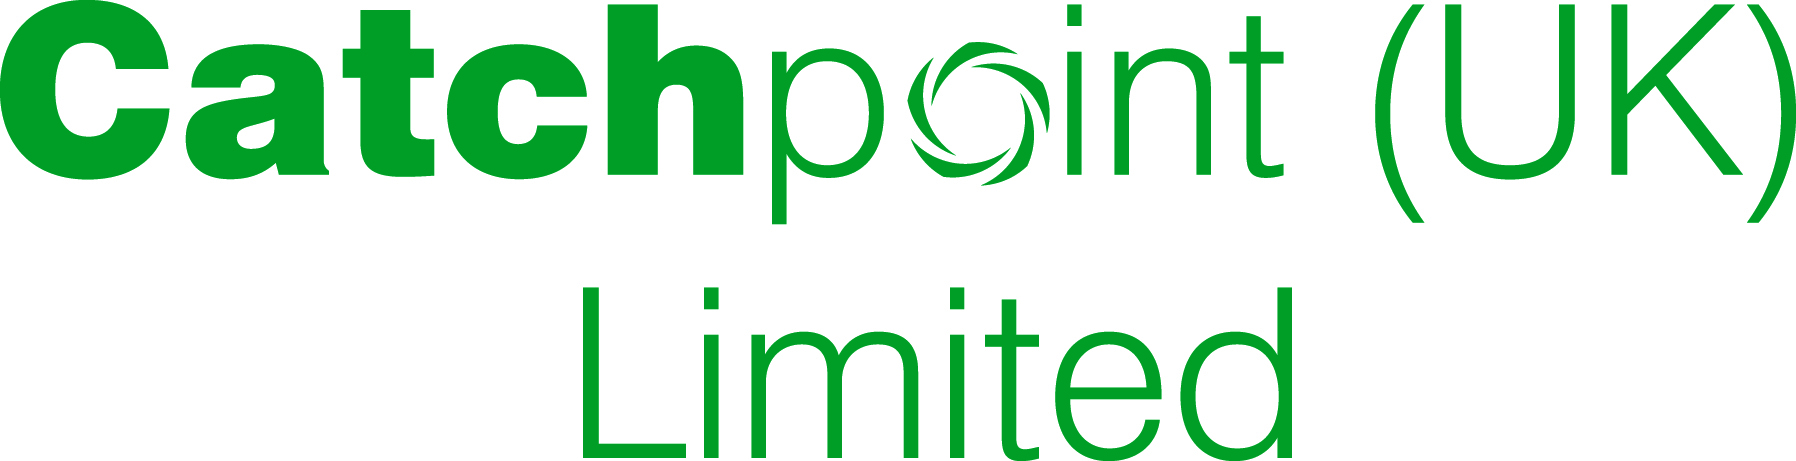 Catchpoint UK logo